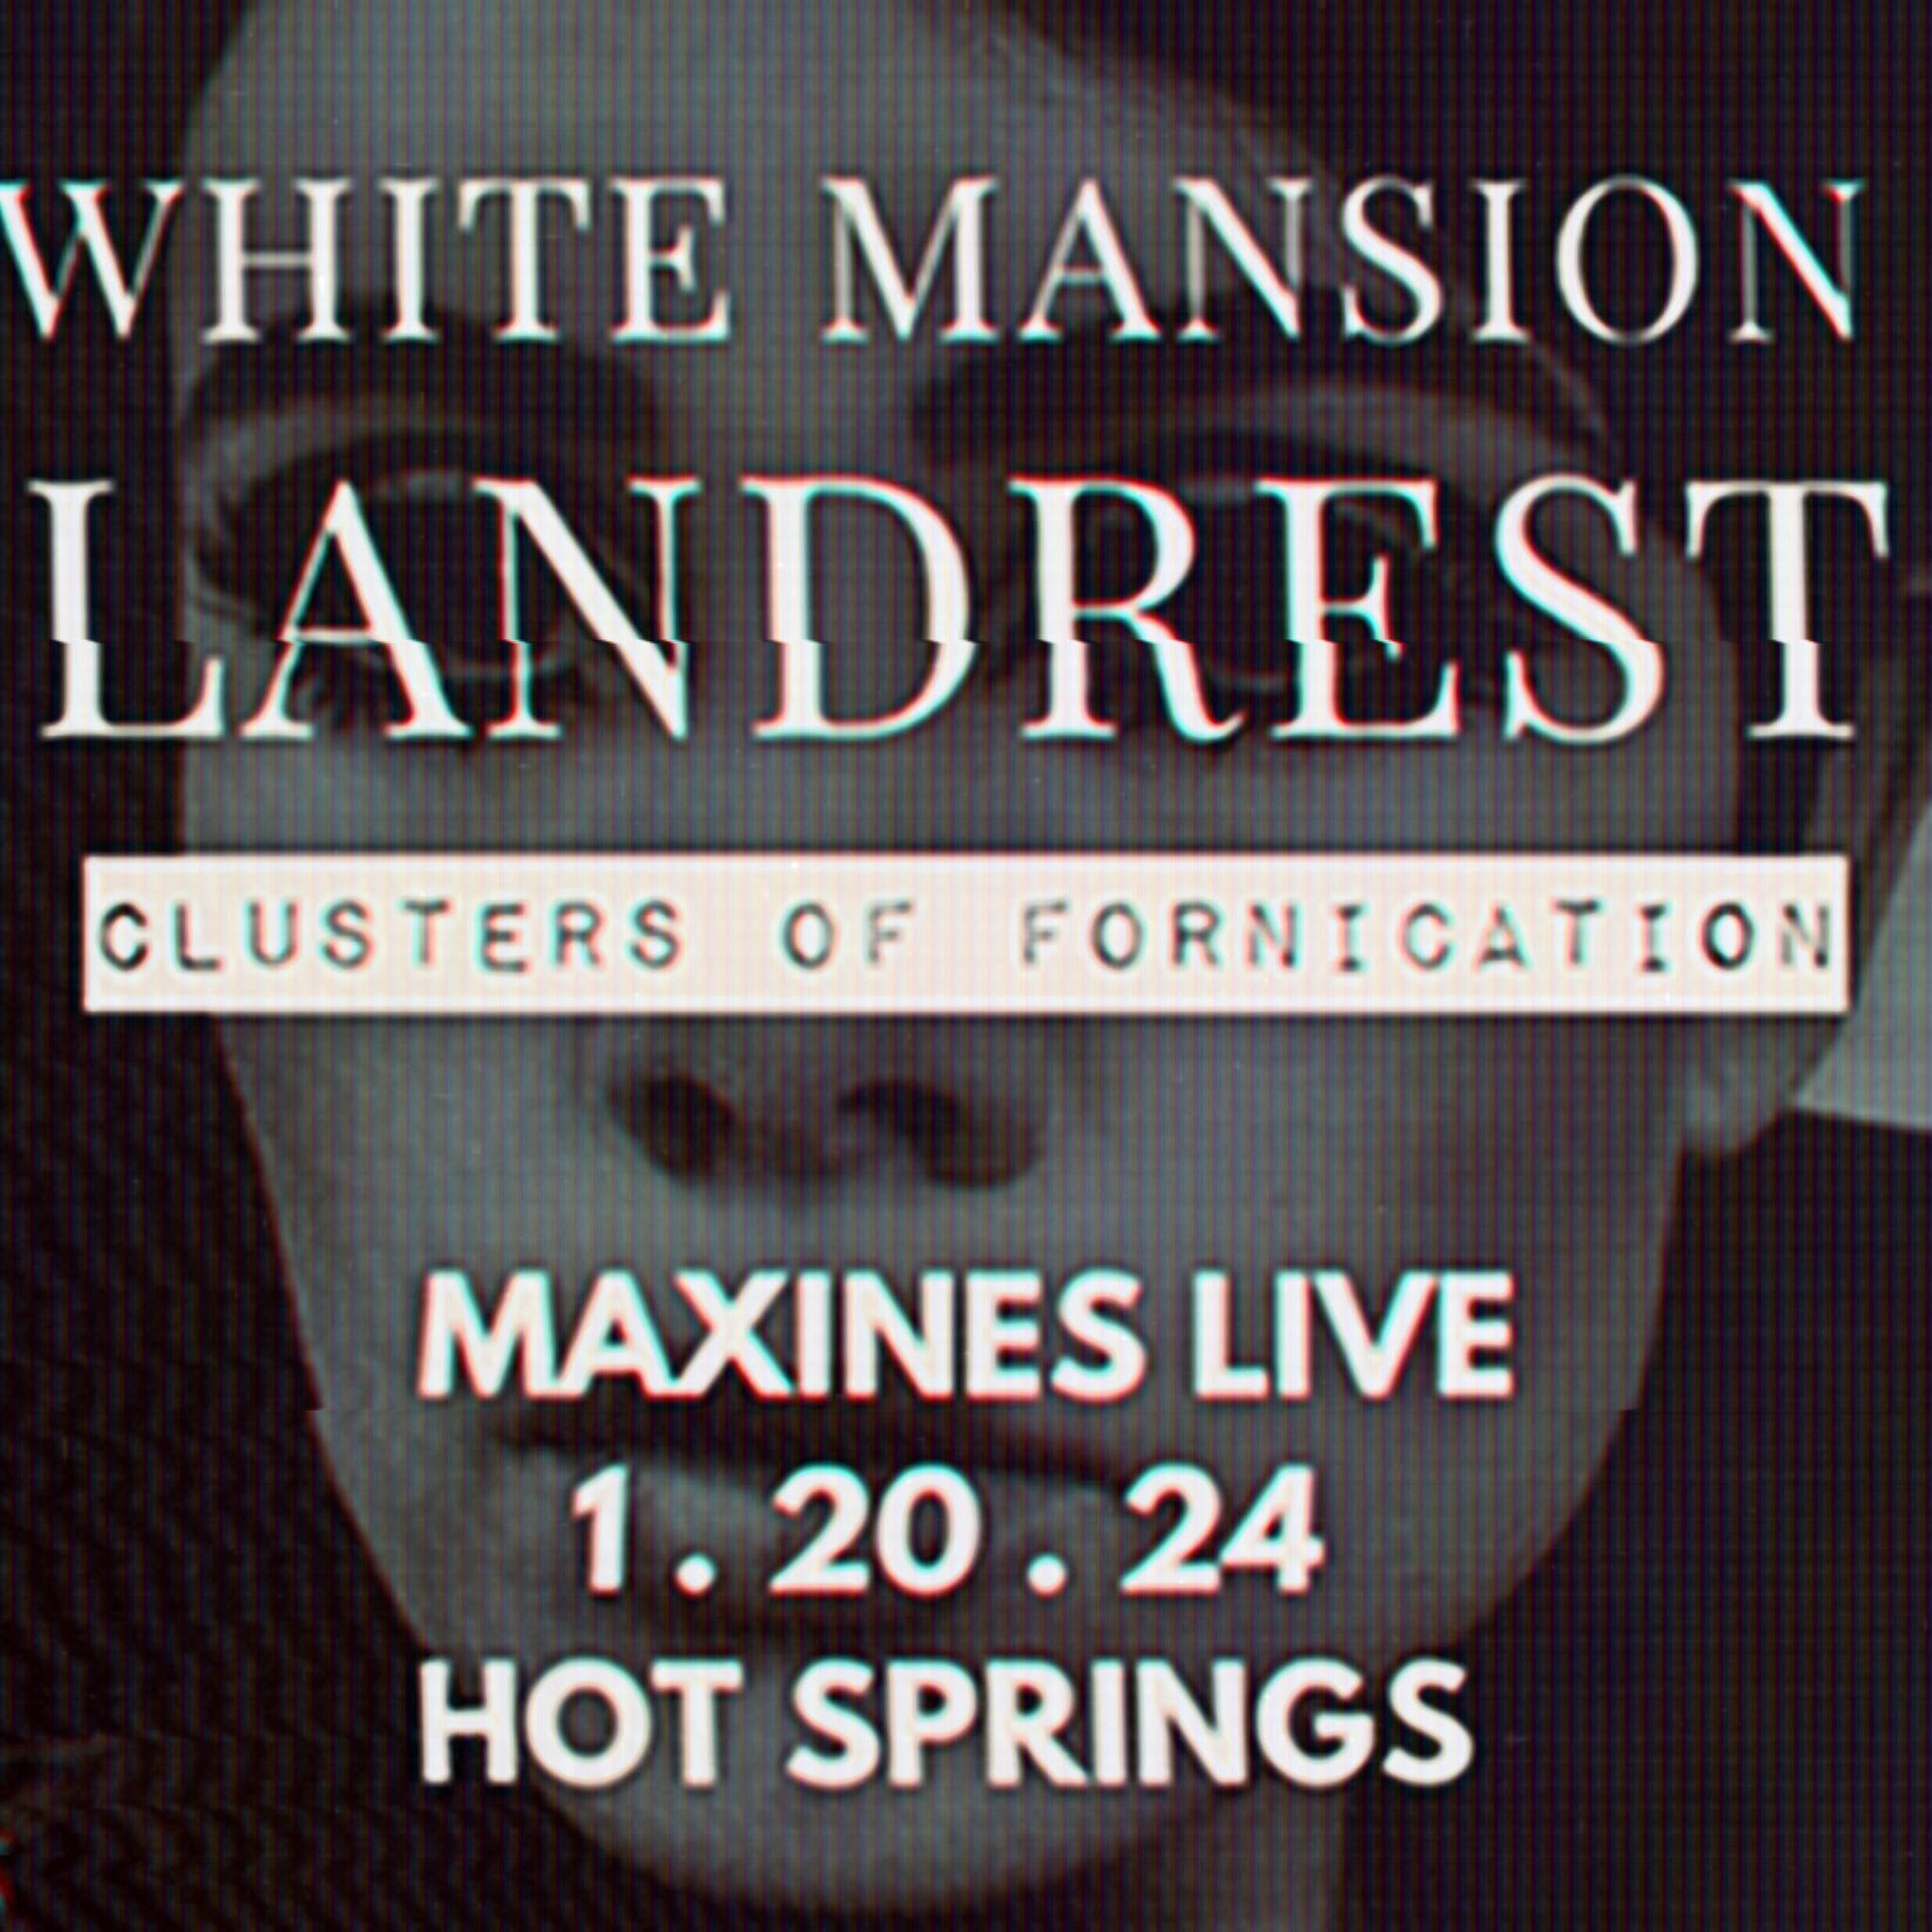 Flyer for White Mansion, Clusters of Fornication, and Landrest at Maxine&rsquo;s, Saturday January 20, 2024. The image shows a close-up picture of a woman&rsquo;s face. The picture looks like a photo taken of a CRT screen. The text reads, &ldquo;White Mansion, Landrest, and Clusters of Fornication. At Maxine&rsquo;s, 700 Central Avenue, Hot Springs, Arkansas.&rdquo;